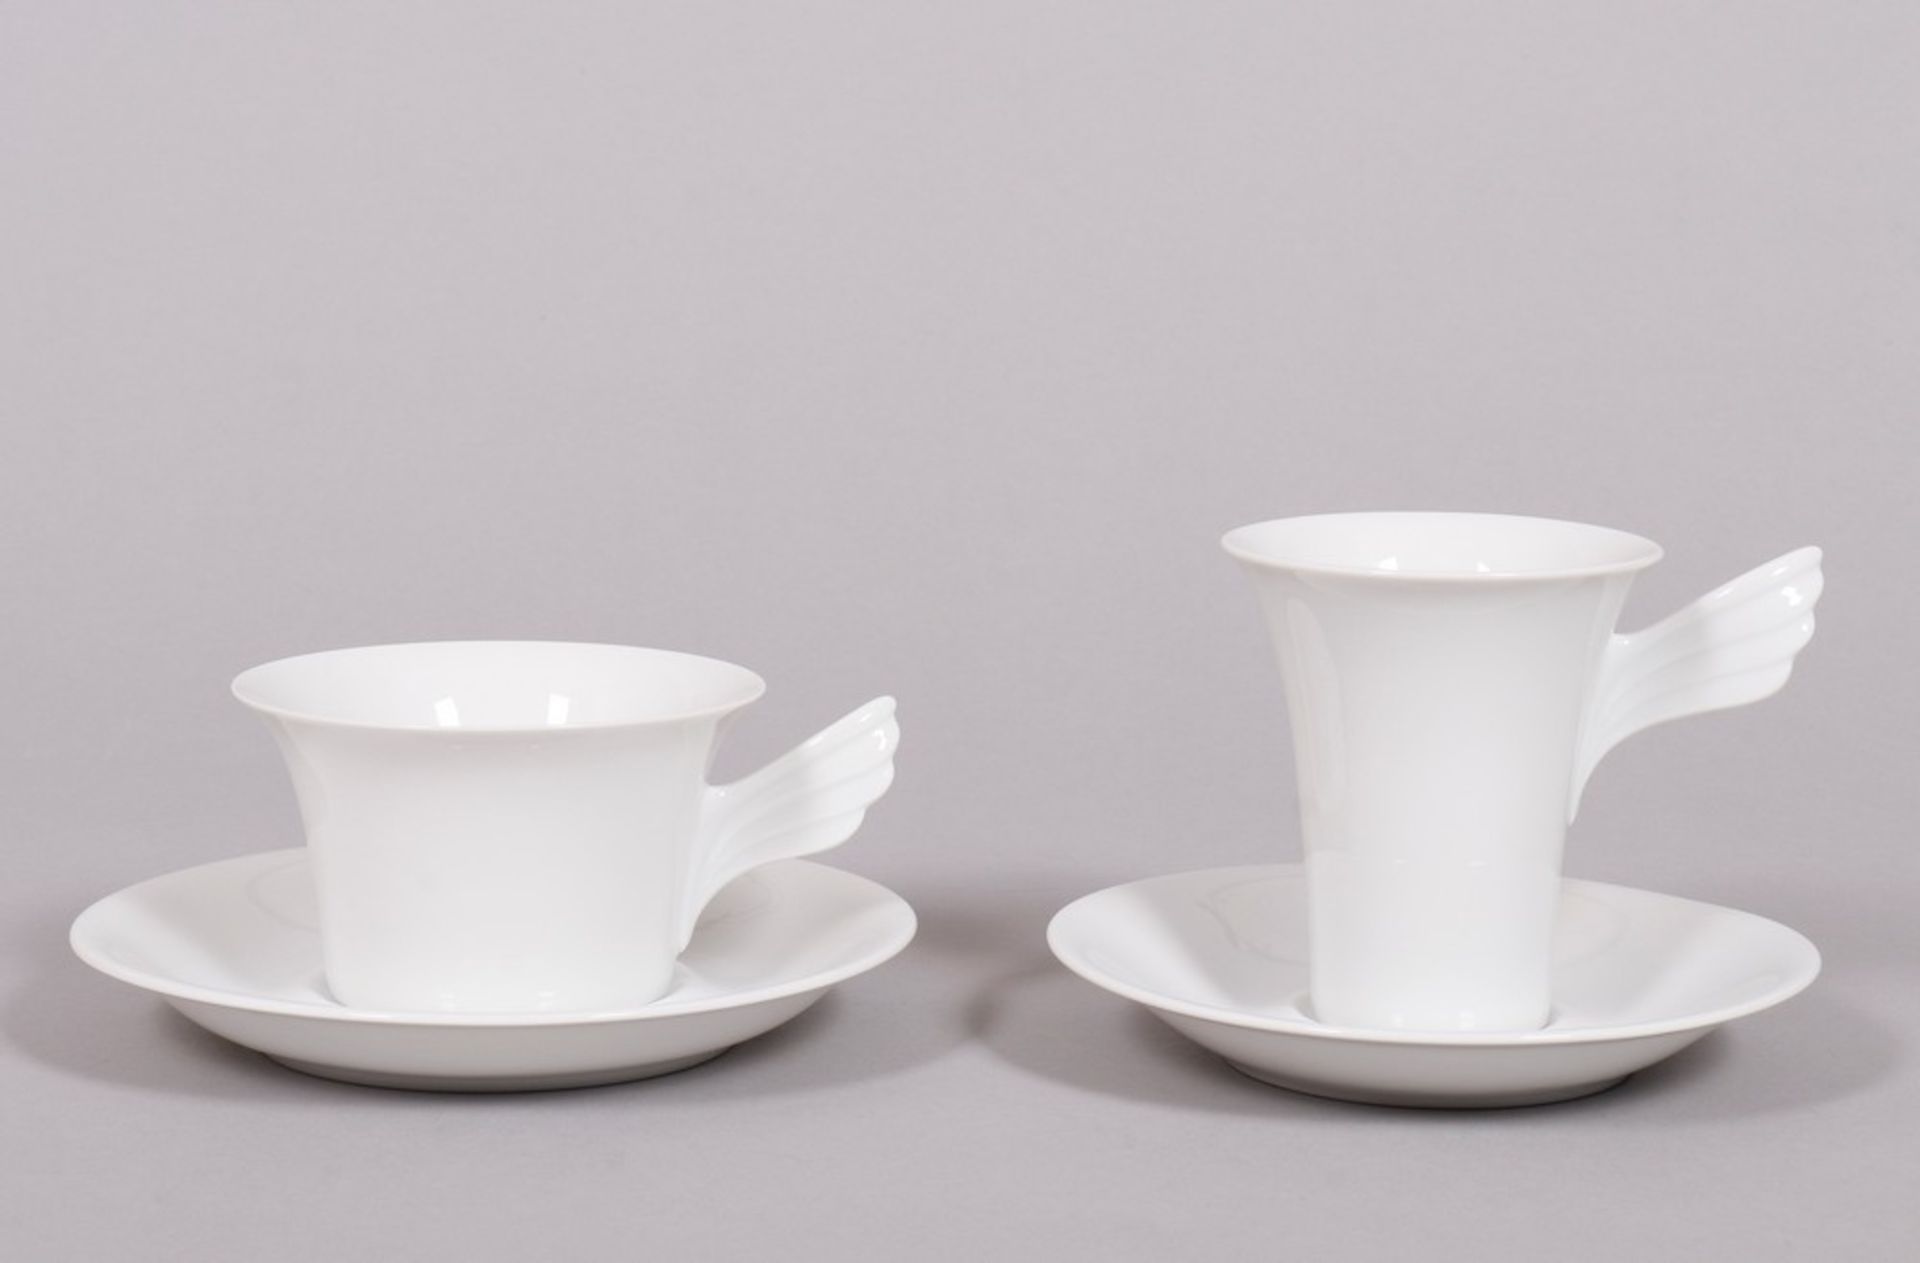 Coffee and tea service, "Mythos" shape, design Paul Wunderlich for Rosenthal, 2.H. 20th C., 27 pcs - Image 6 of 9